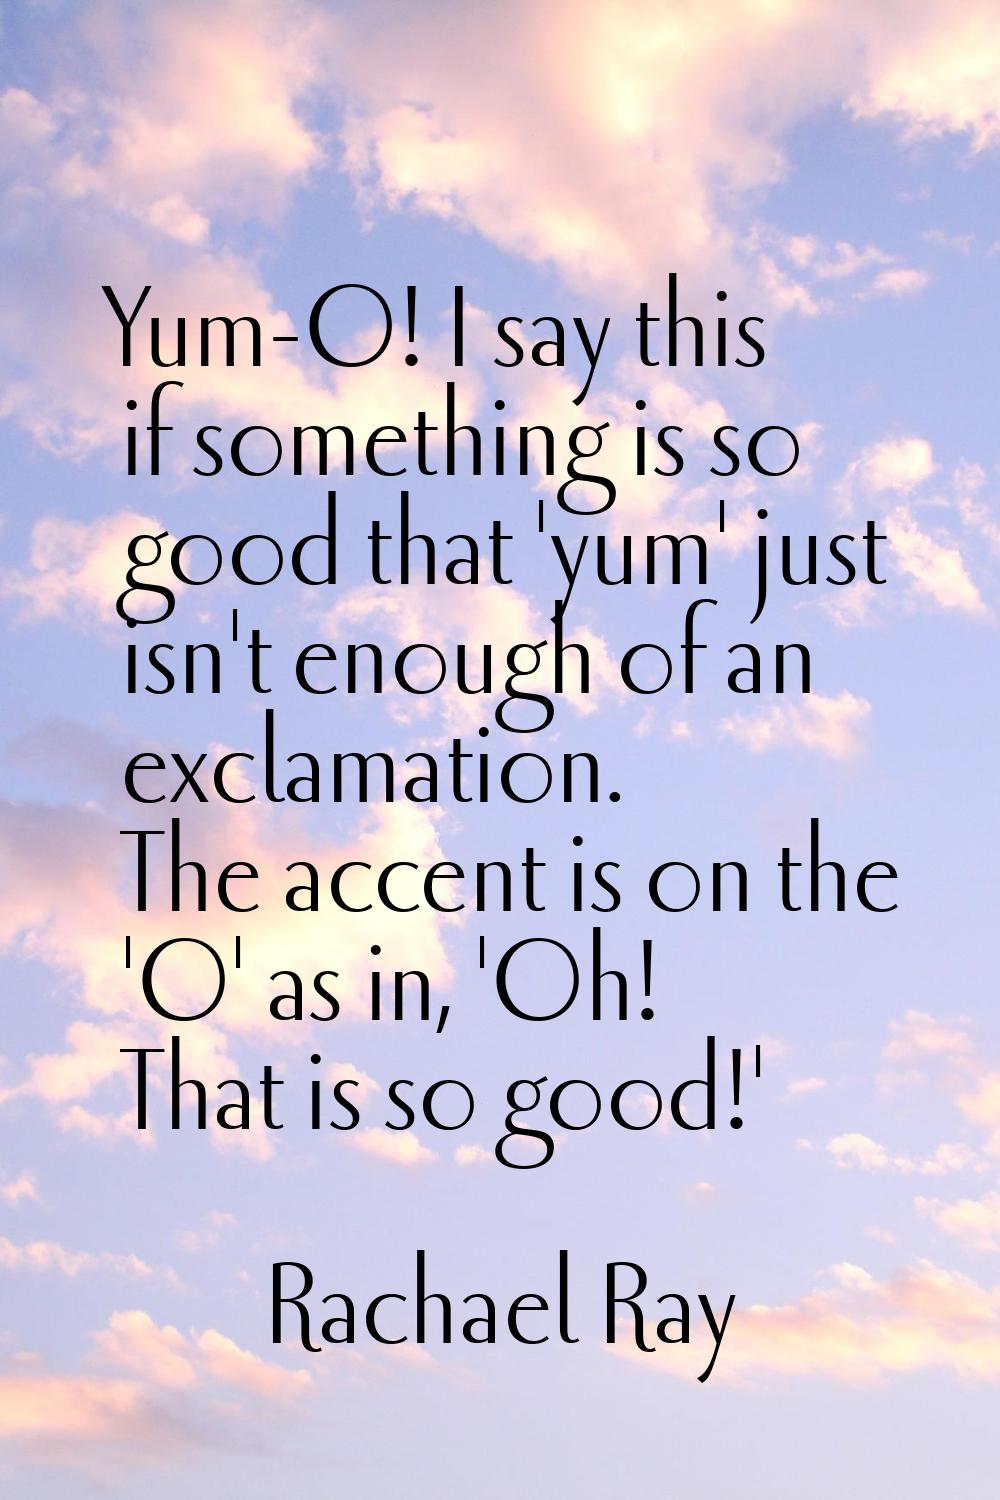 Yum-O! I say this if something is so good that 'yum' just isn't enough of an exclamation. The accen